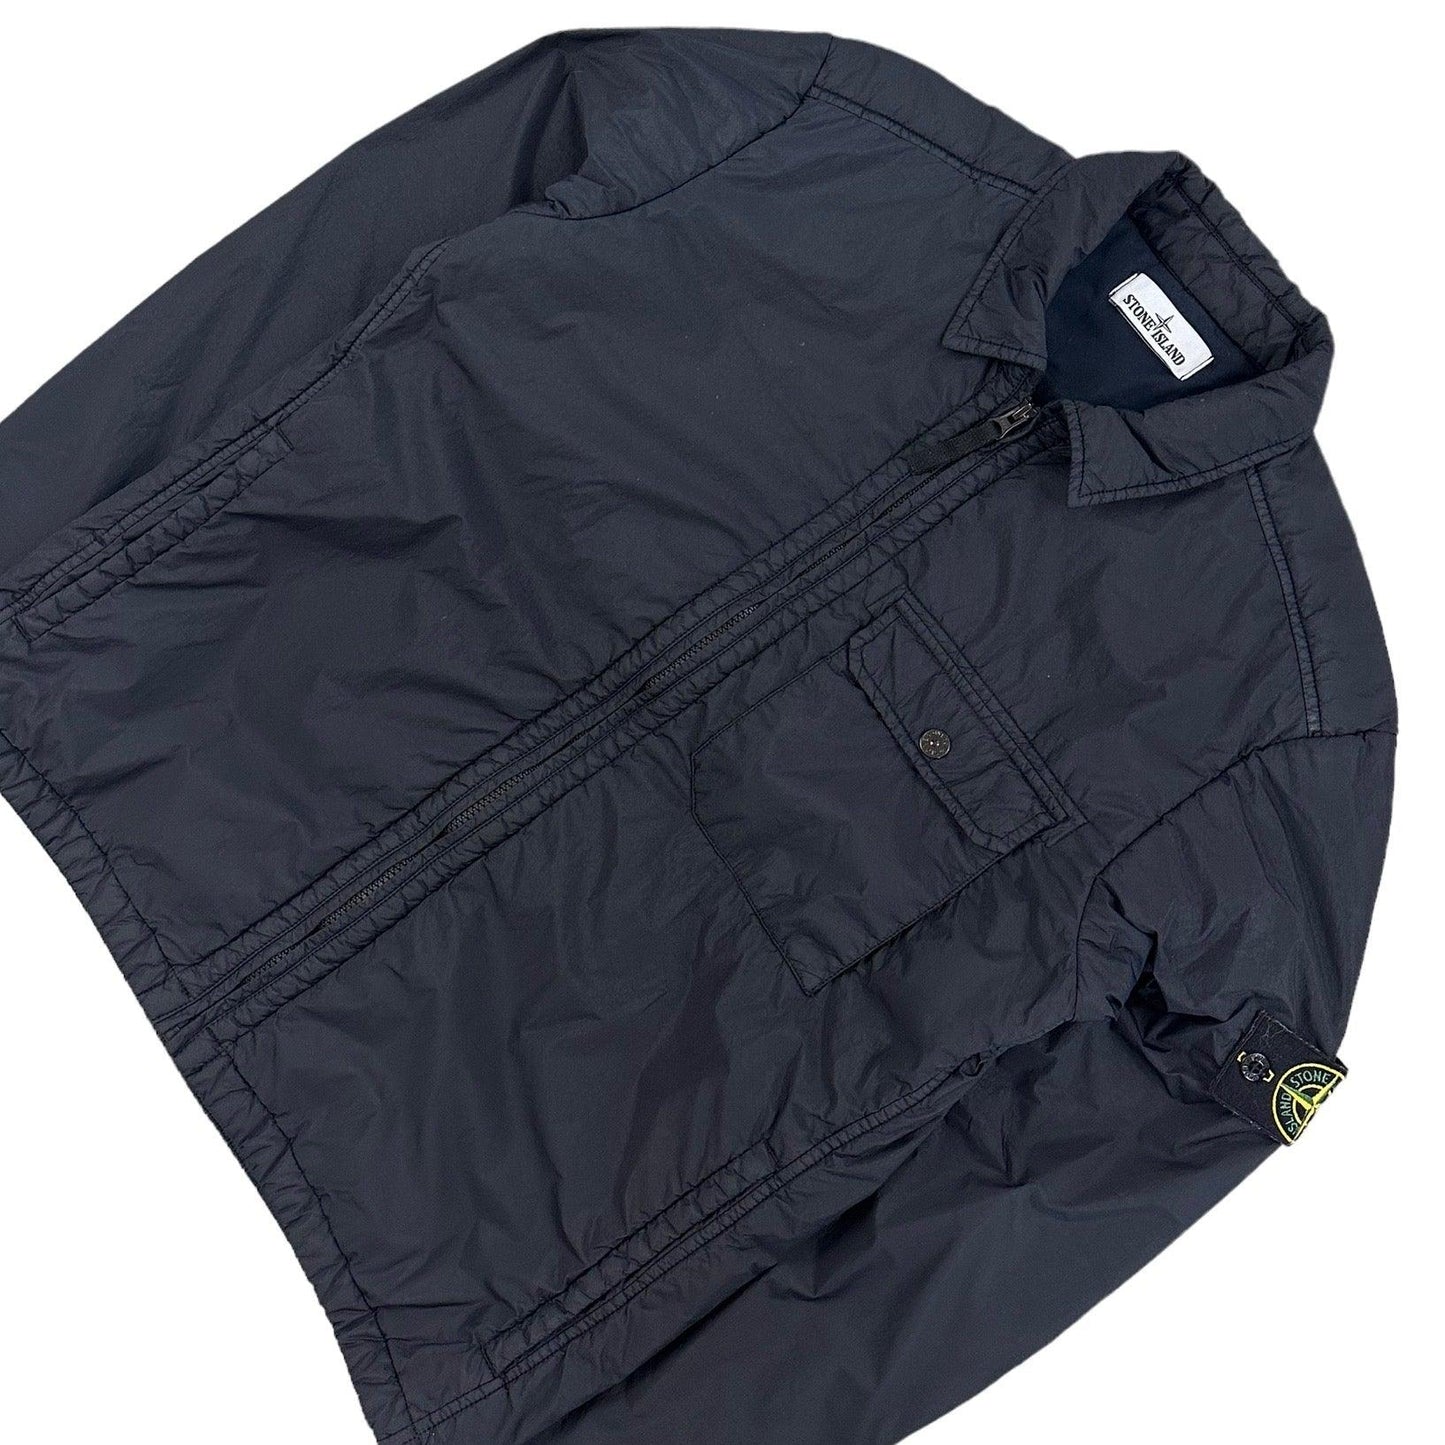 Stone Island Nylon Quilted Zip Up Overshirt - Known Source